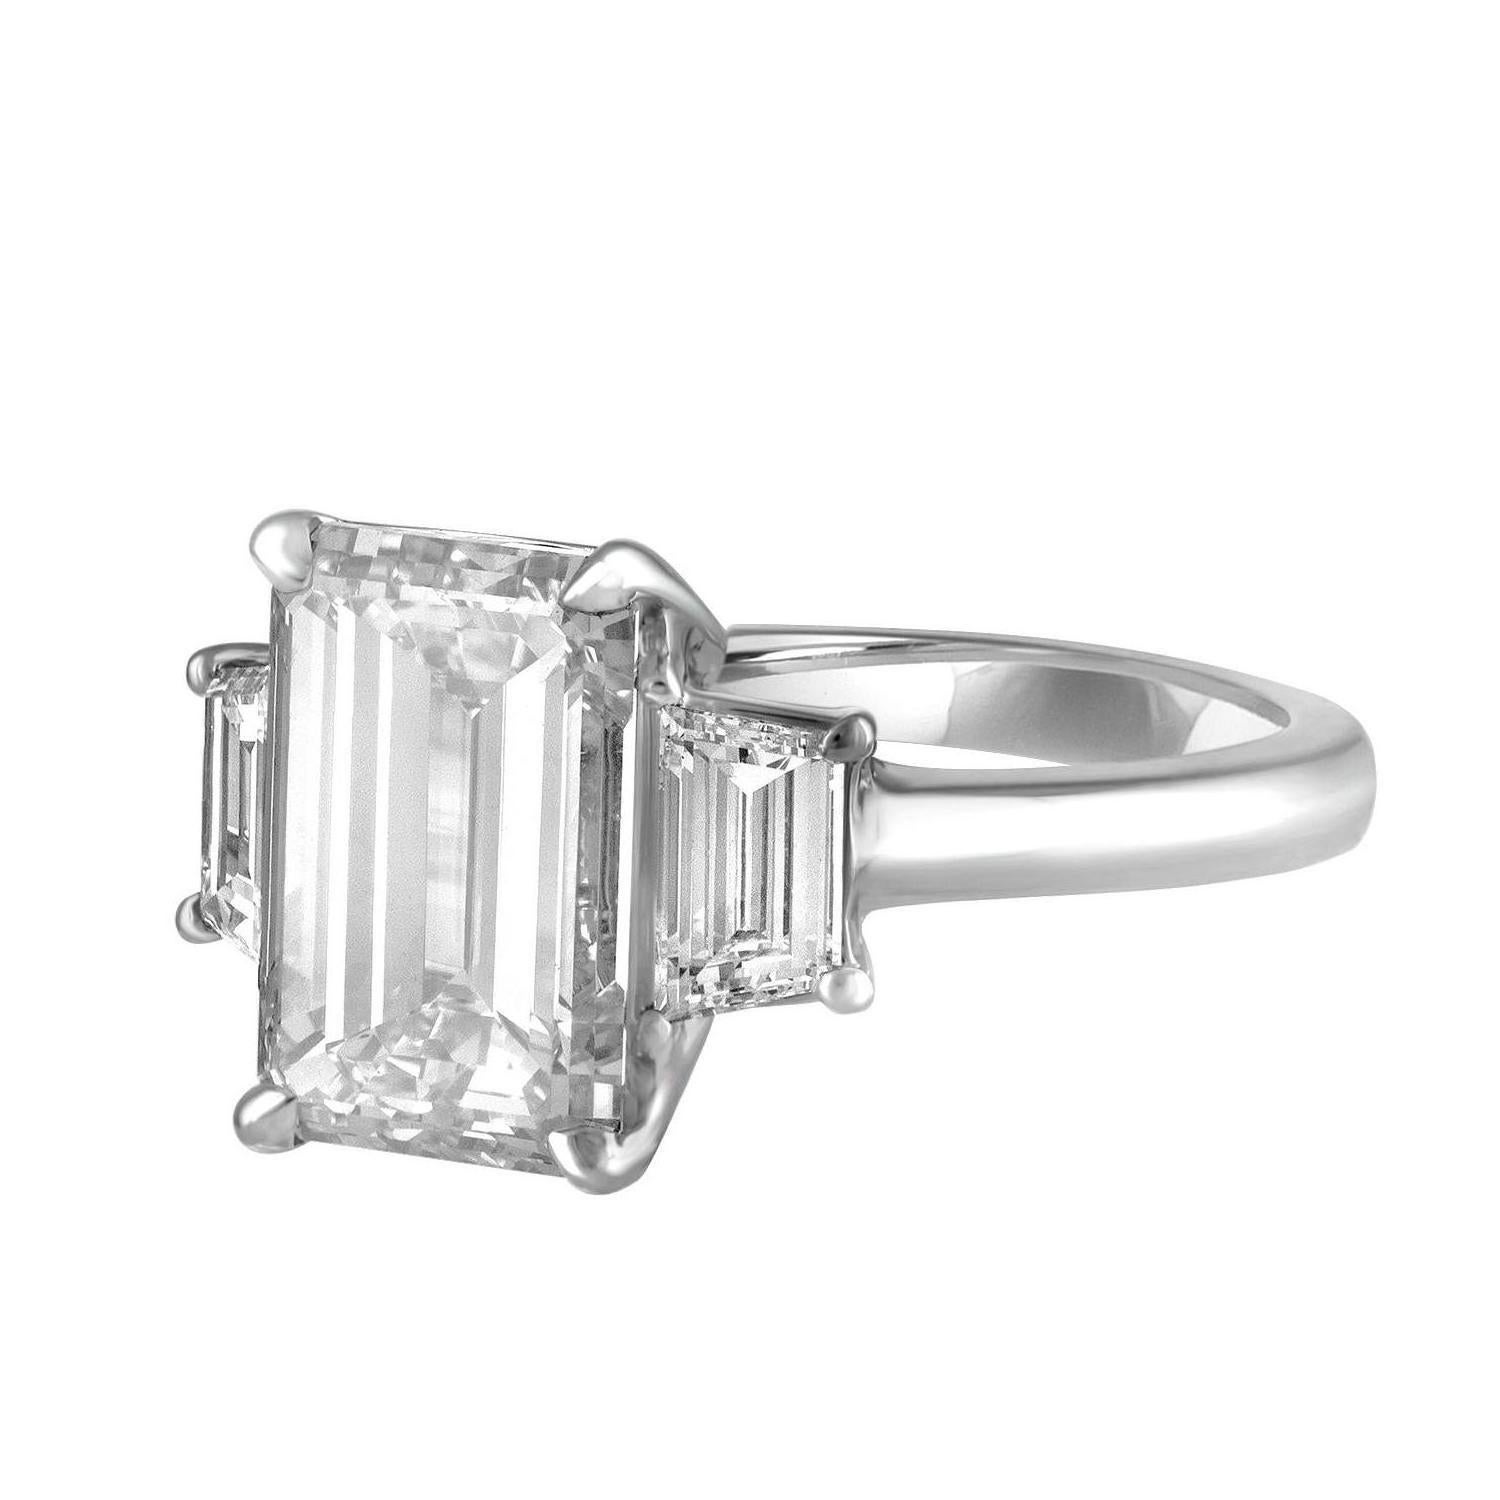 5.01 Carat Emerald Cut Diamond, Certified by GIA to be J in Color and VS2 in Clarity. Certificate Number 6157936307.
 5.01 carat Emerald Cut is set in Hand Crafted Platinum Mounting with Two Step Cuts Trapezoids. Trapezoids are 0.88 Carat total